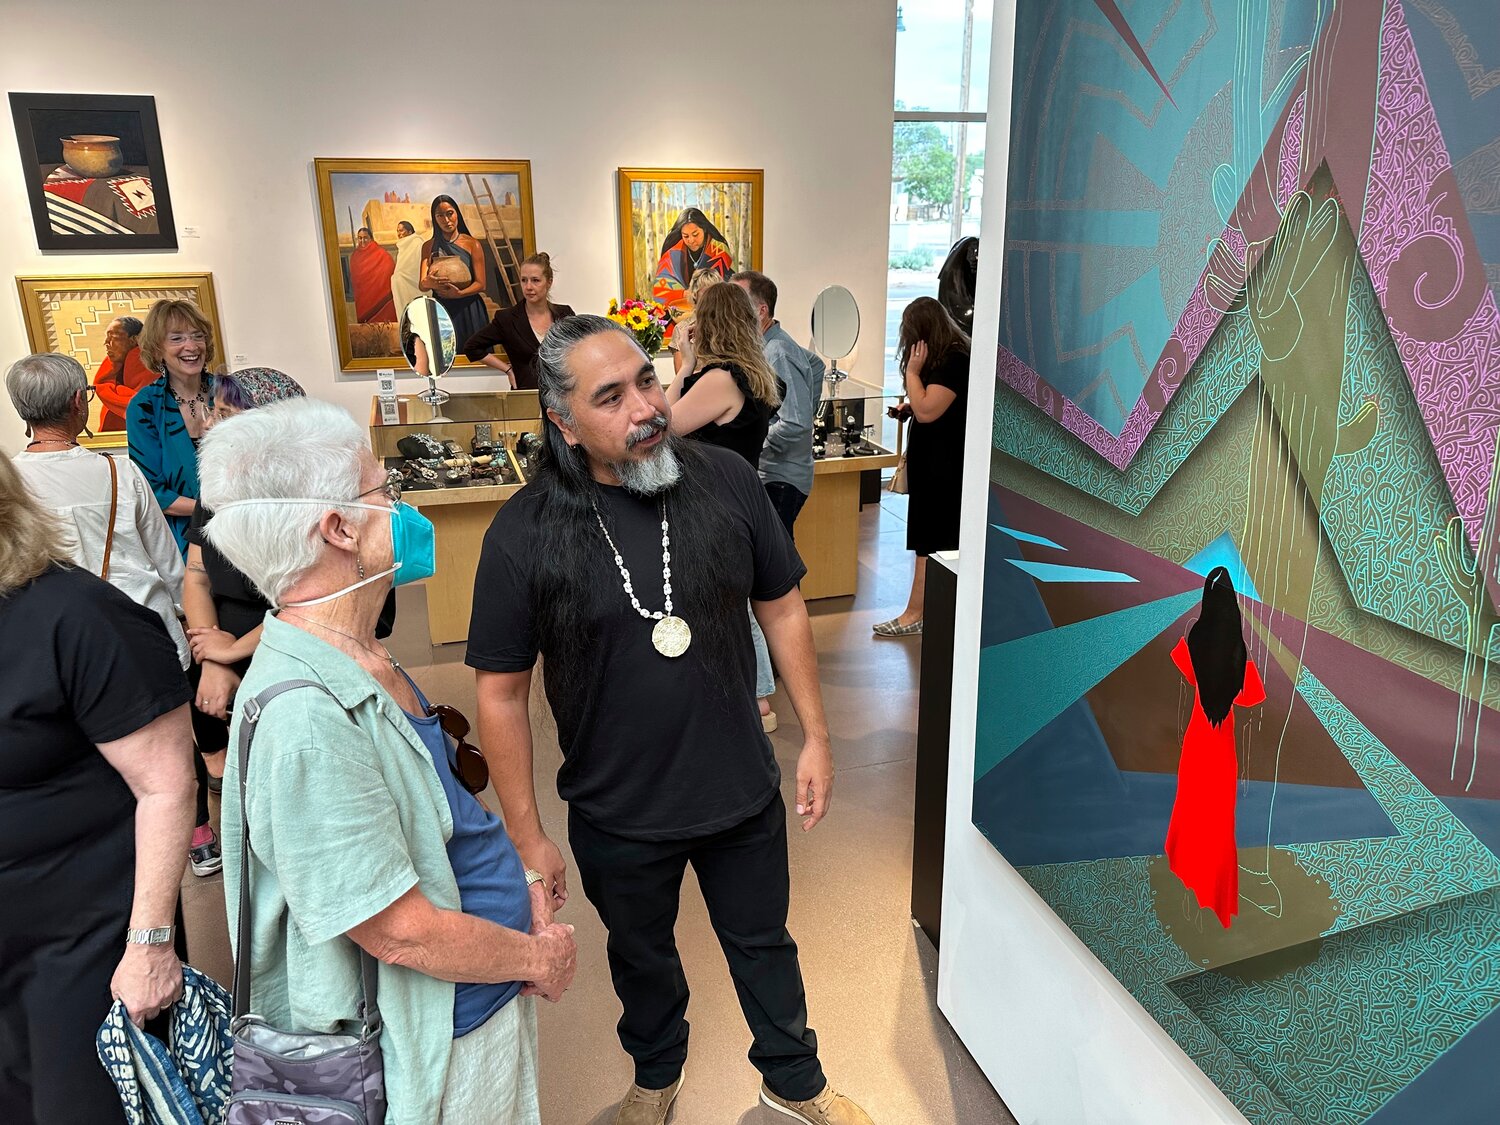 Thomas "Breeze" Marcus at the exhibition opening of his work at Blue Rain Gallery in Santa Fe, N.M. in August, which included the painting "Answered Prayer," at right. A separate group exhibition that included his work was postponed in Arizona amid outrage over a painting by Shepard Fairey that is critical of police.